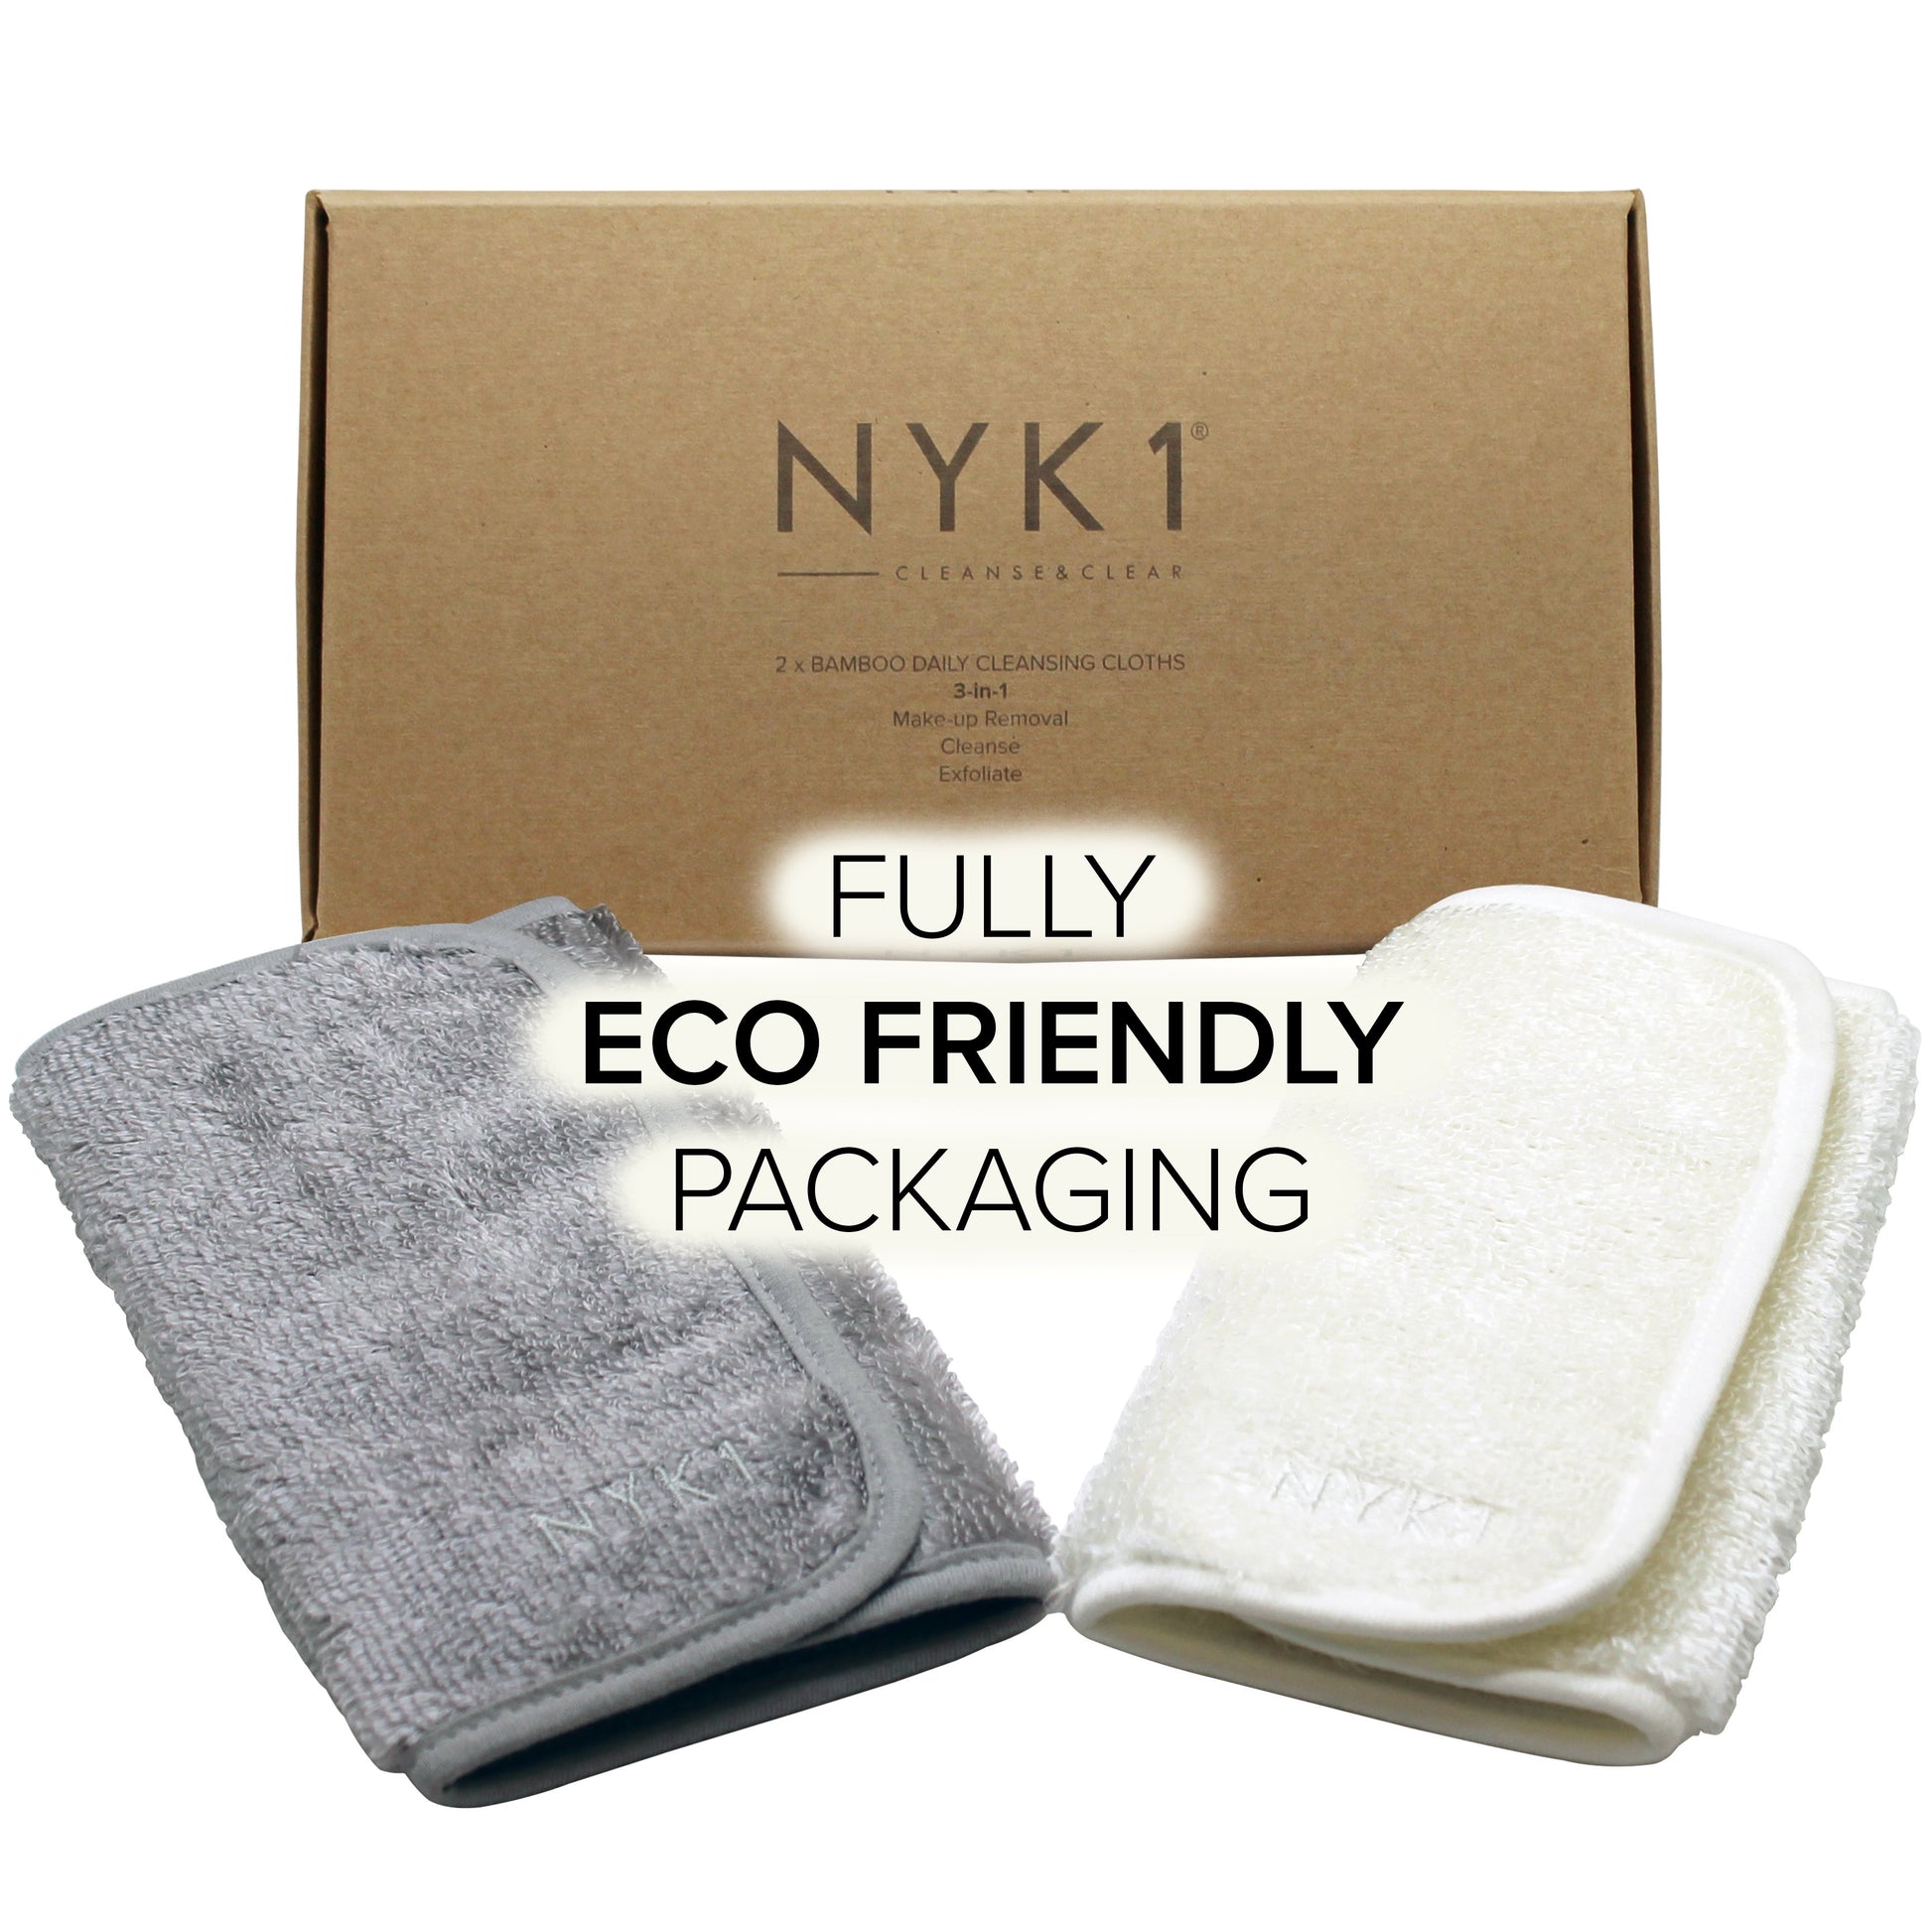 NYK1 Bamboo Face Cloth - Pack of 2 in Eco Friendly Packaging